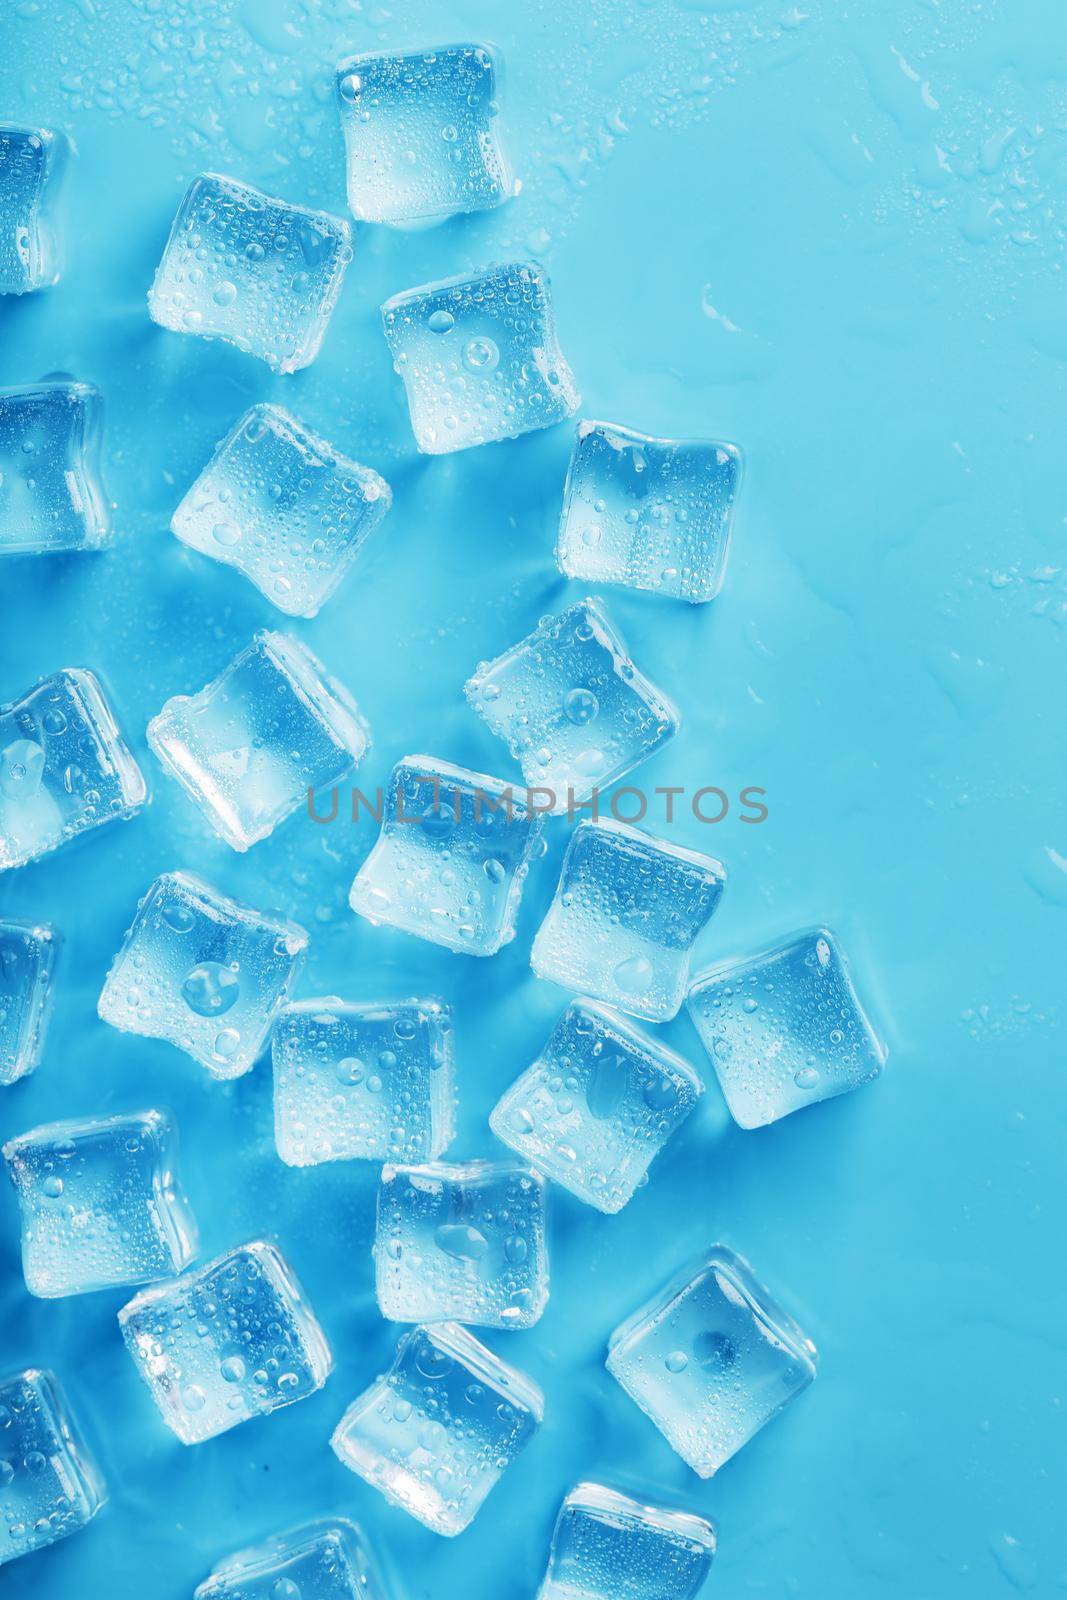 Ice cubes with water drops scattered on a blue background, top view. Refreshing ice.